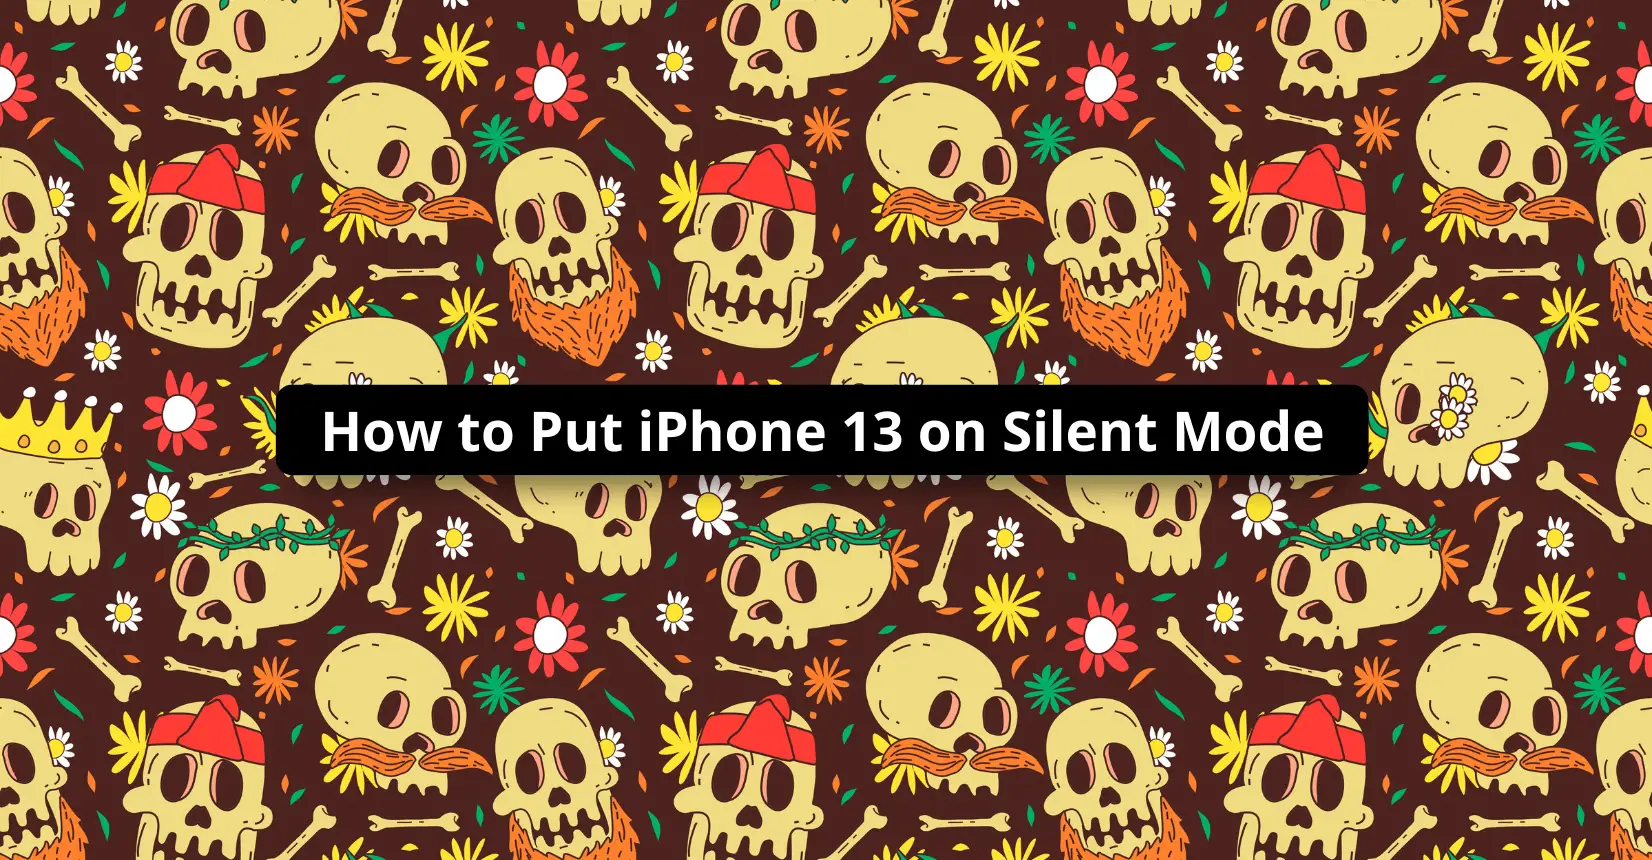 How to Put iPhone 13 on Silent Mode